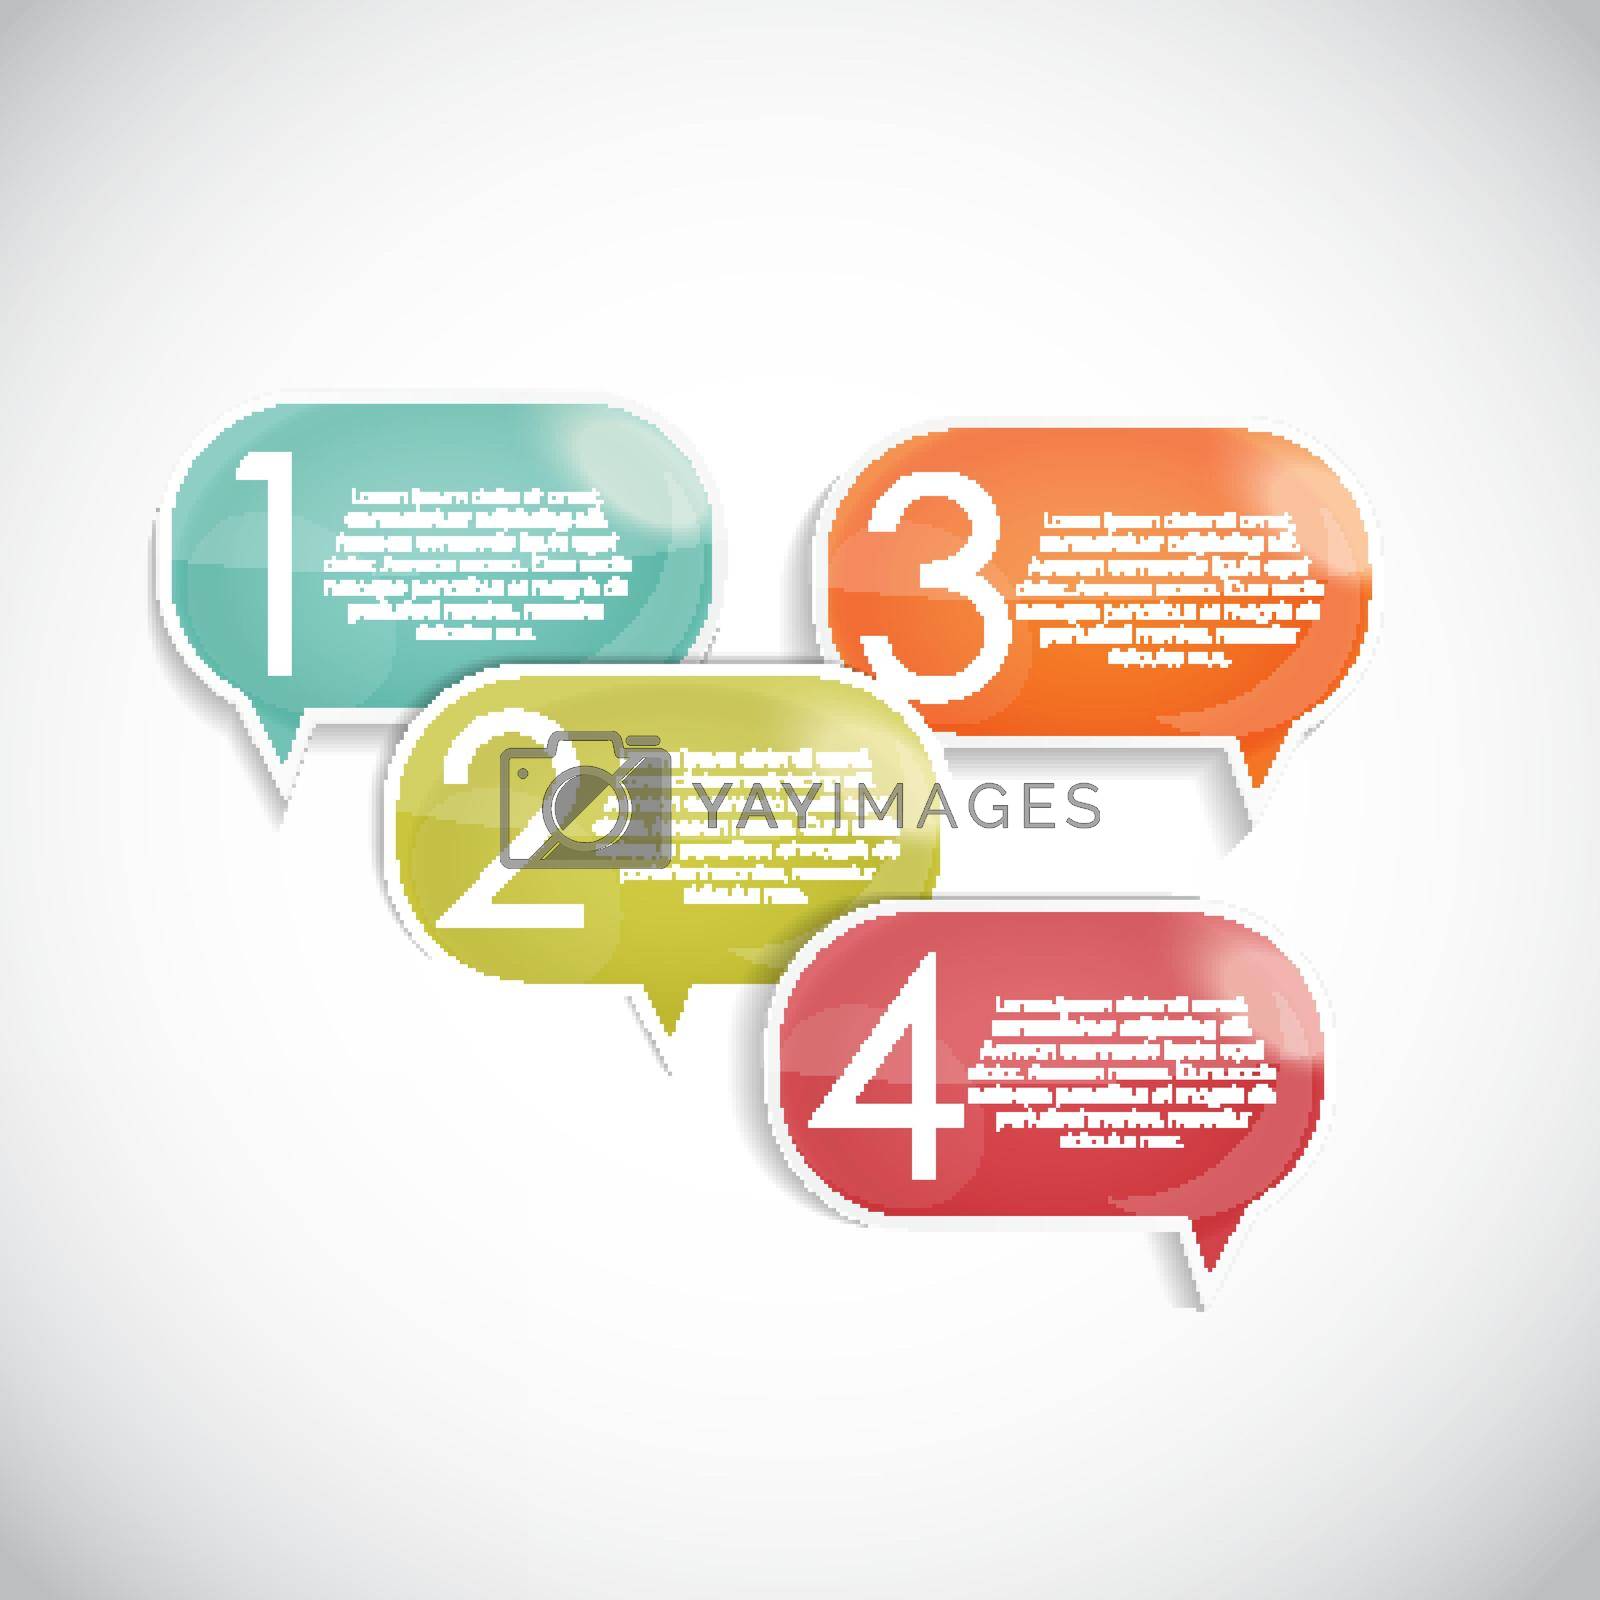 Royalty free image of Infographic Templates for Business Vector Illustration. EPS10 by yganko